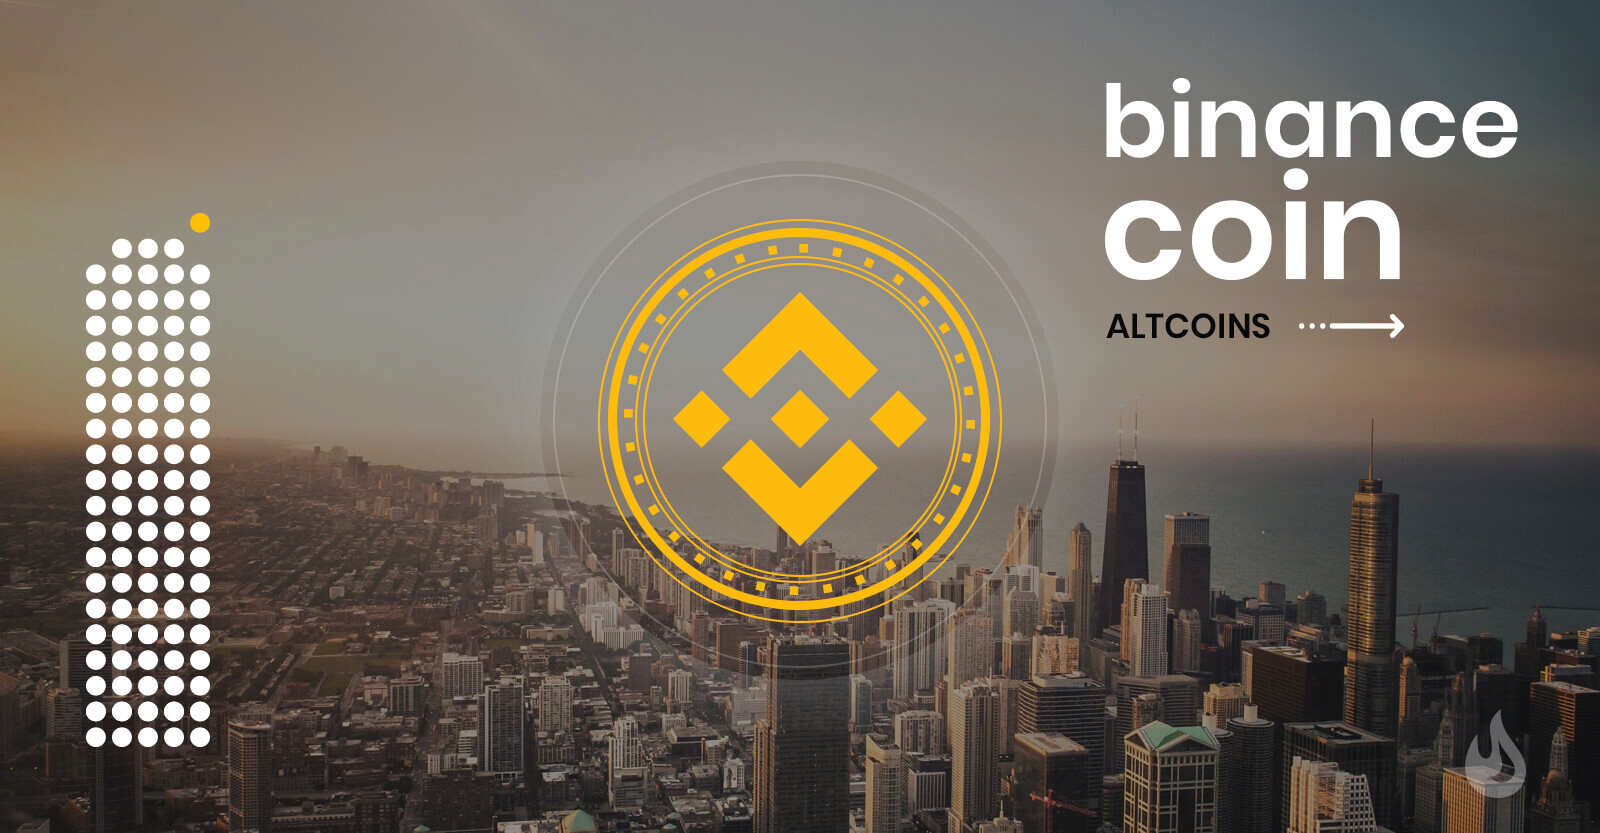 Binance small cap coins automatic crypto wallet